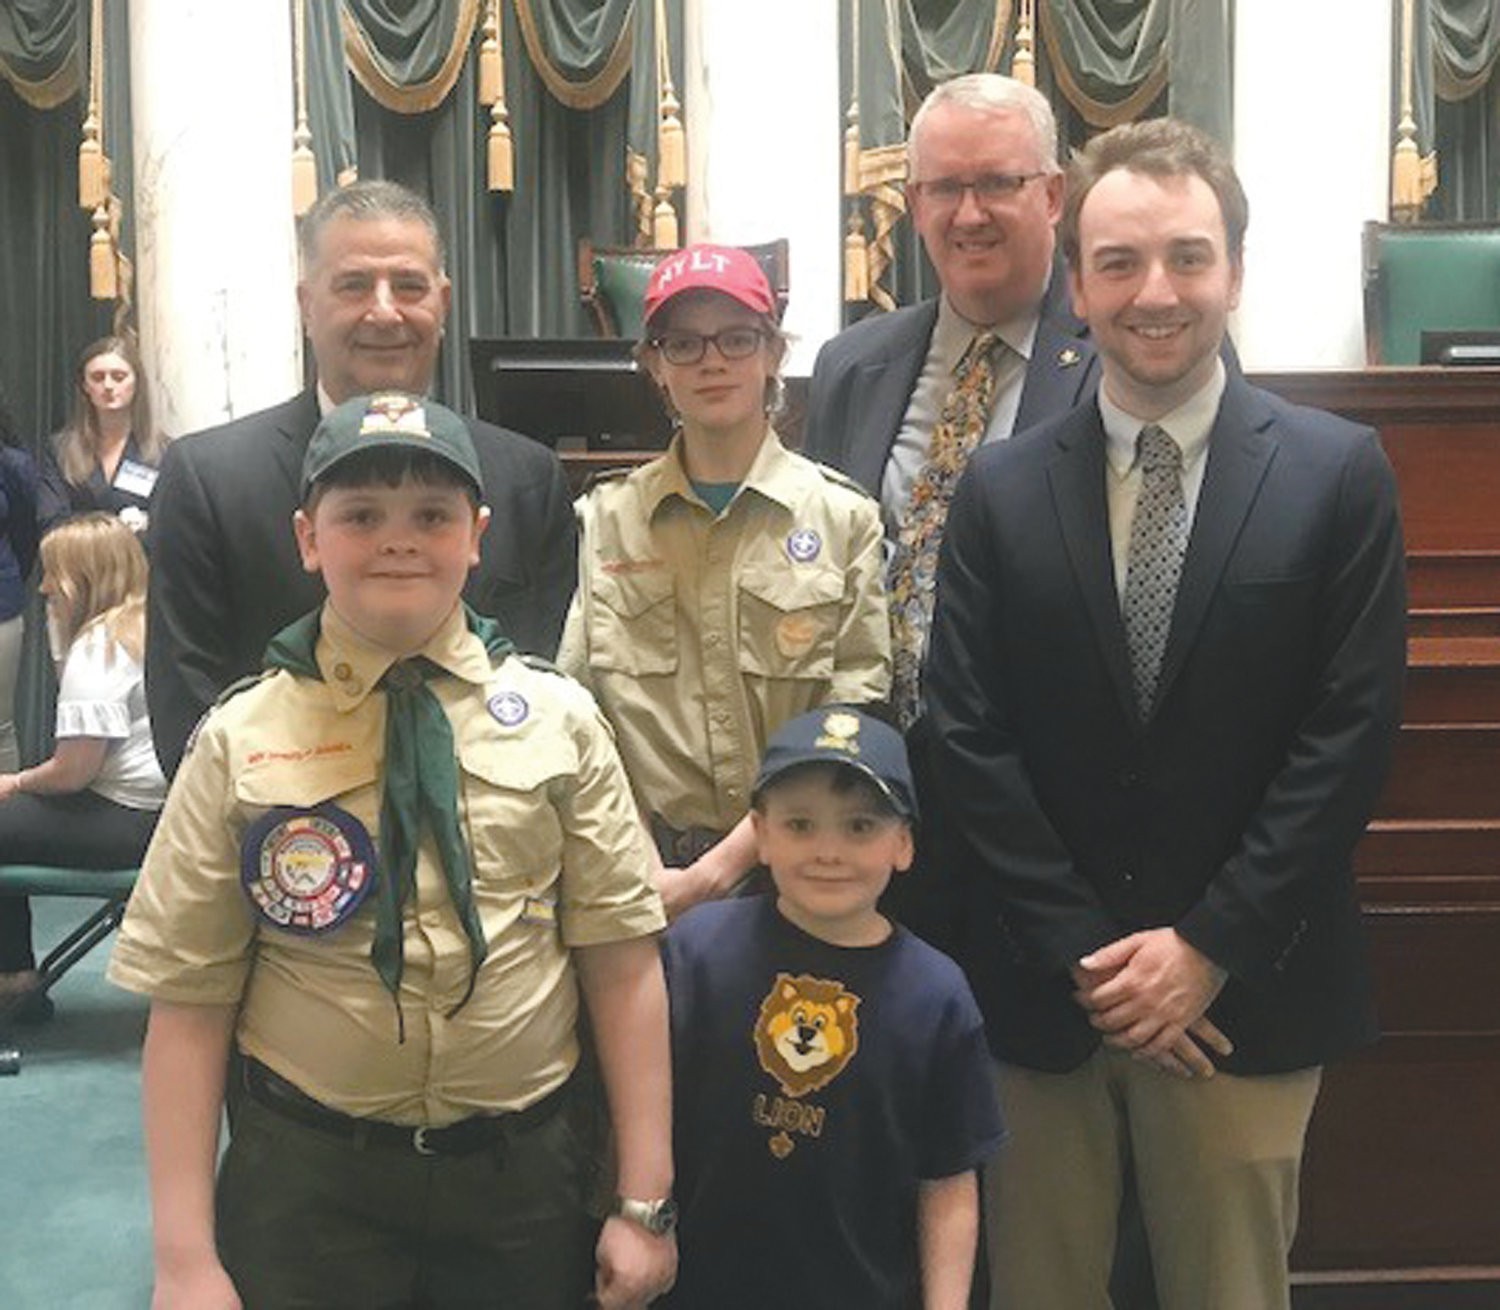 SCOUTS HONORED: Pictured during the Report to State gathering at the State House are, back row from left, Sen. Frank Lombardo, Connor Malone and Scout Executive and CEO Tim McCandless; and front row from left, Jude Ladino, Jesse Ladino and Matt Goudreau, Northwest district executive.